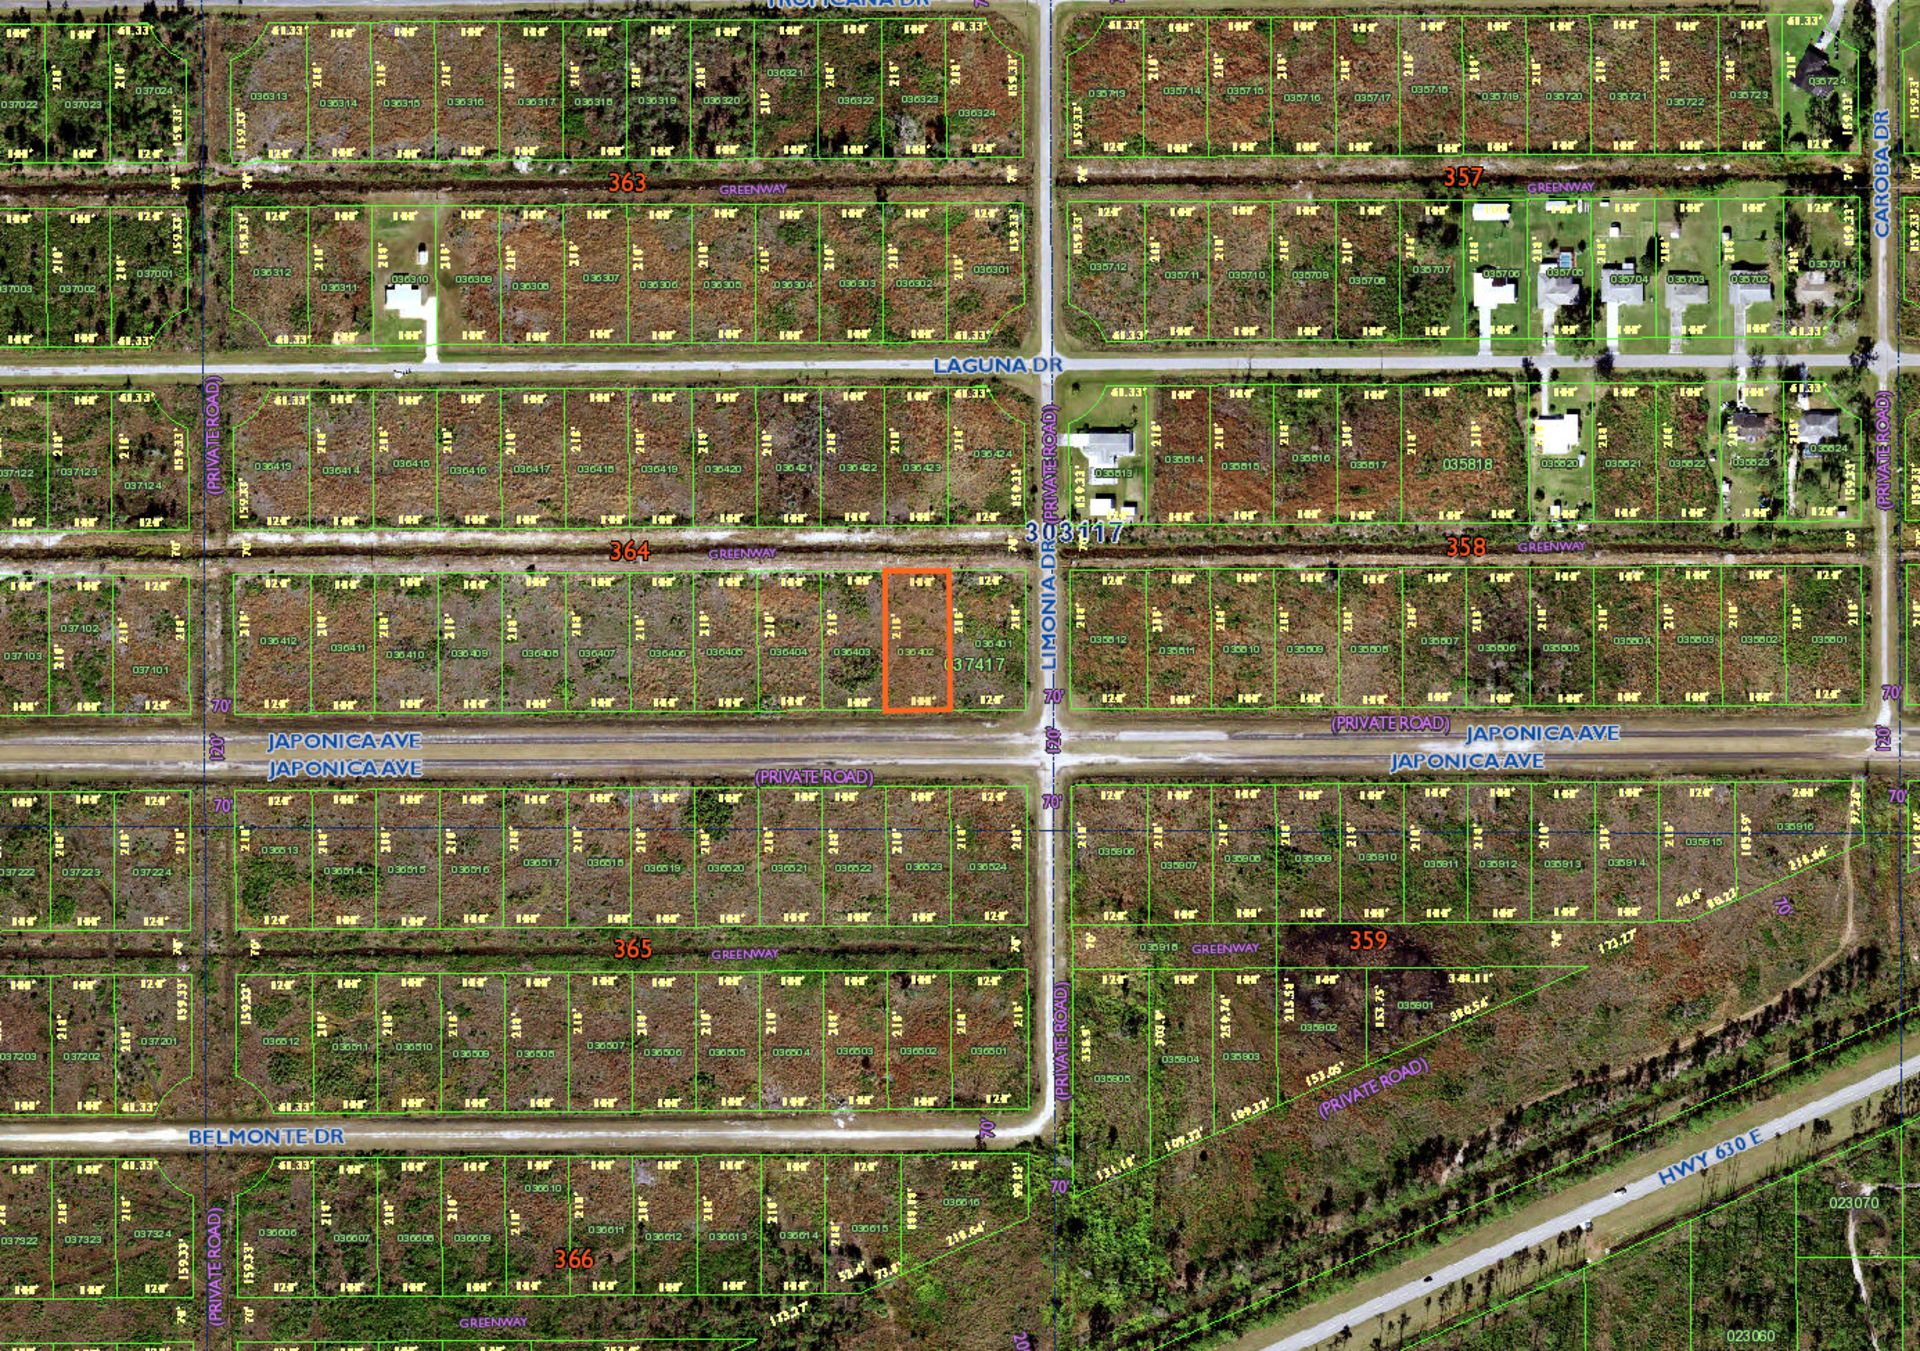 Build Your Central Florida Getaway on this Half-Acre Lot! - Image 2 of 11